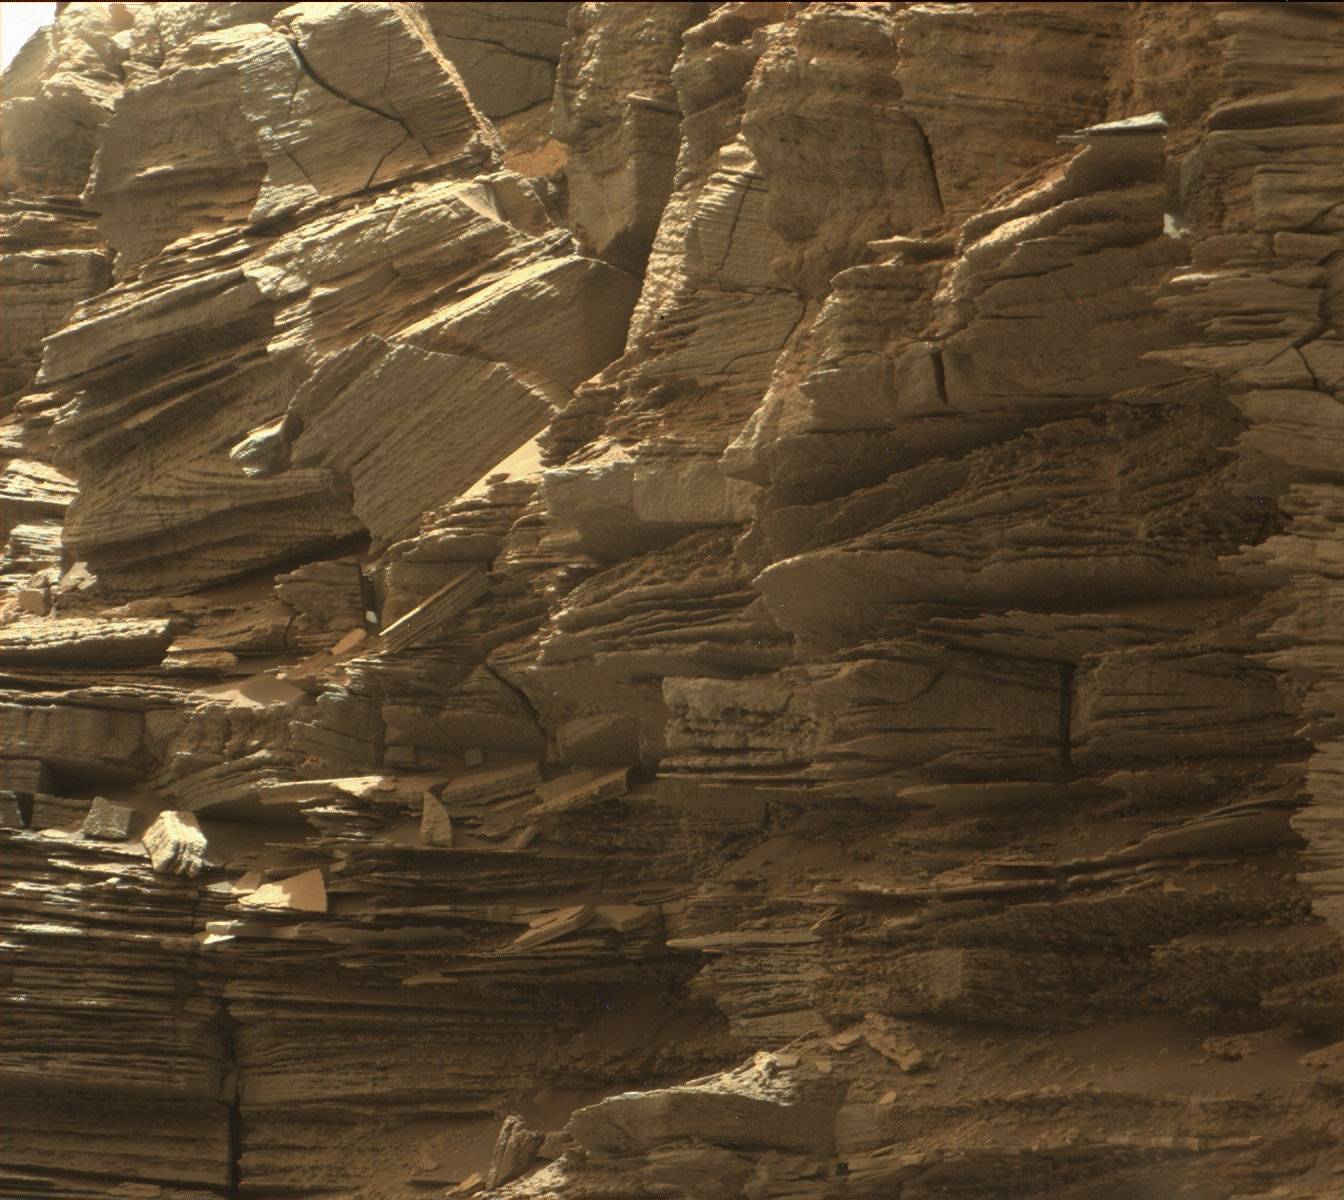 Rock layers in the Murray Buttes area in lower Mount Sharp